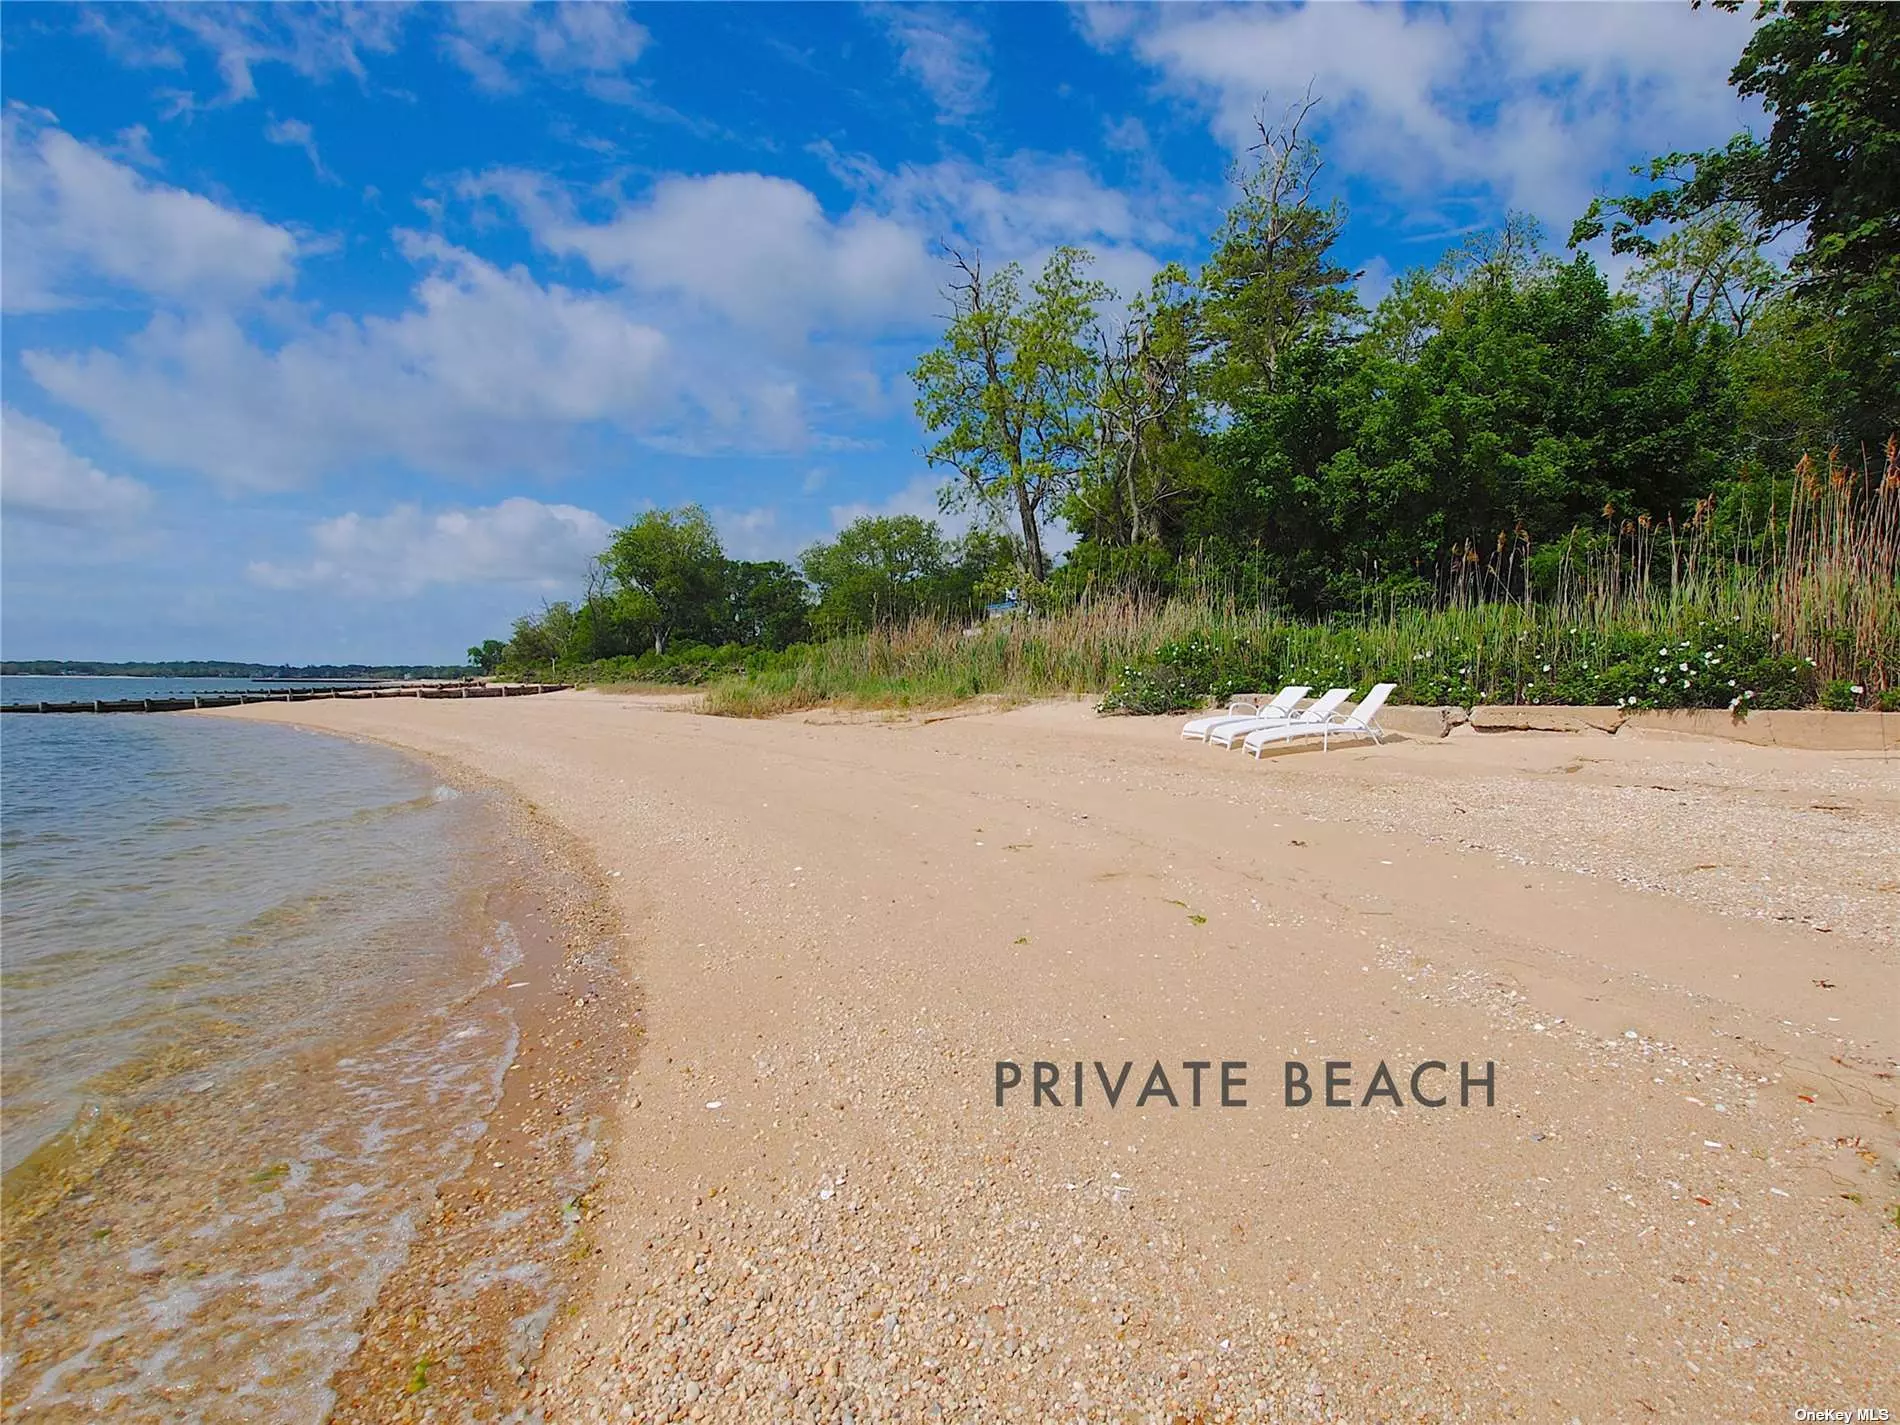 Quintessential waterfront North Fork farmhouse with private sandy beach on Southold Bay, part of the Peconic Estuary. Beautifully maintained, this large 4BR/ 2.55 BTH home benefits from many recent upgrades, including new chef&rsquo;s kitchen, renovated powder room, screened in front porch and back deck. Fabulous indoor/ outdoor North Fork Summer Living in the mature gardens with specimen trees, waterfront and vineyard views, and your private sugar sand beach to swim, kayak, paddle board, boat and fish. Close to all area attractions. Pet friendly! Walk to vineyards and organic farms for North Fork farm to table dining. Close to fine dining restaurants, farms, and waterfront bars. Fun arts, crafts, yoga, juice bar, live music and water sports, Southold, Greenport Maritime Village and ferries to Shelter Island, Sag Harbor and the South Fork easy to reach. Southold Town Rental Permit 0631